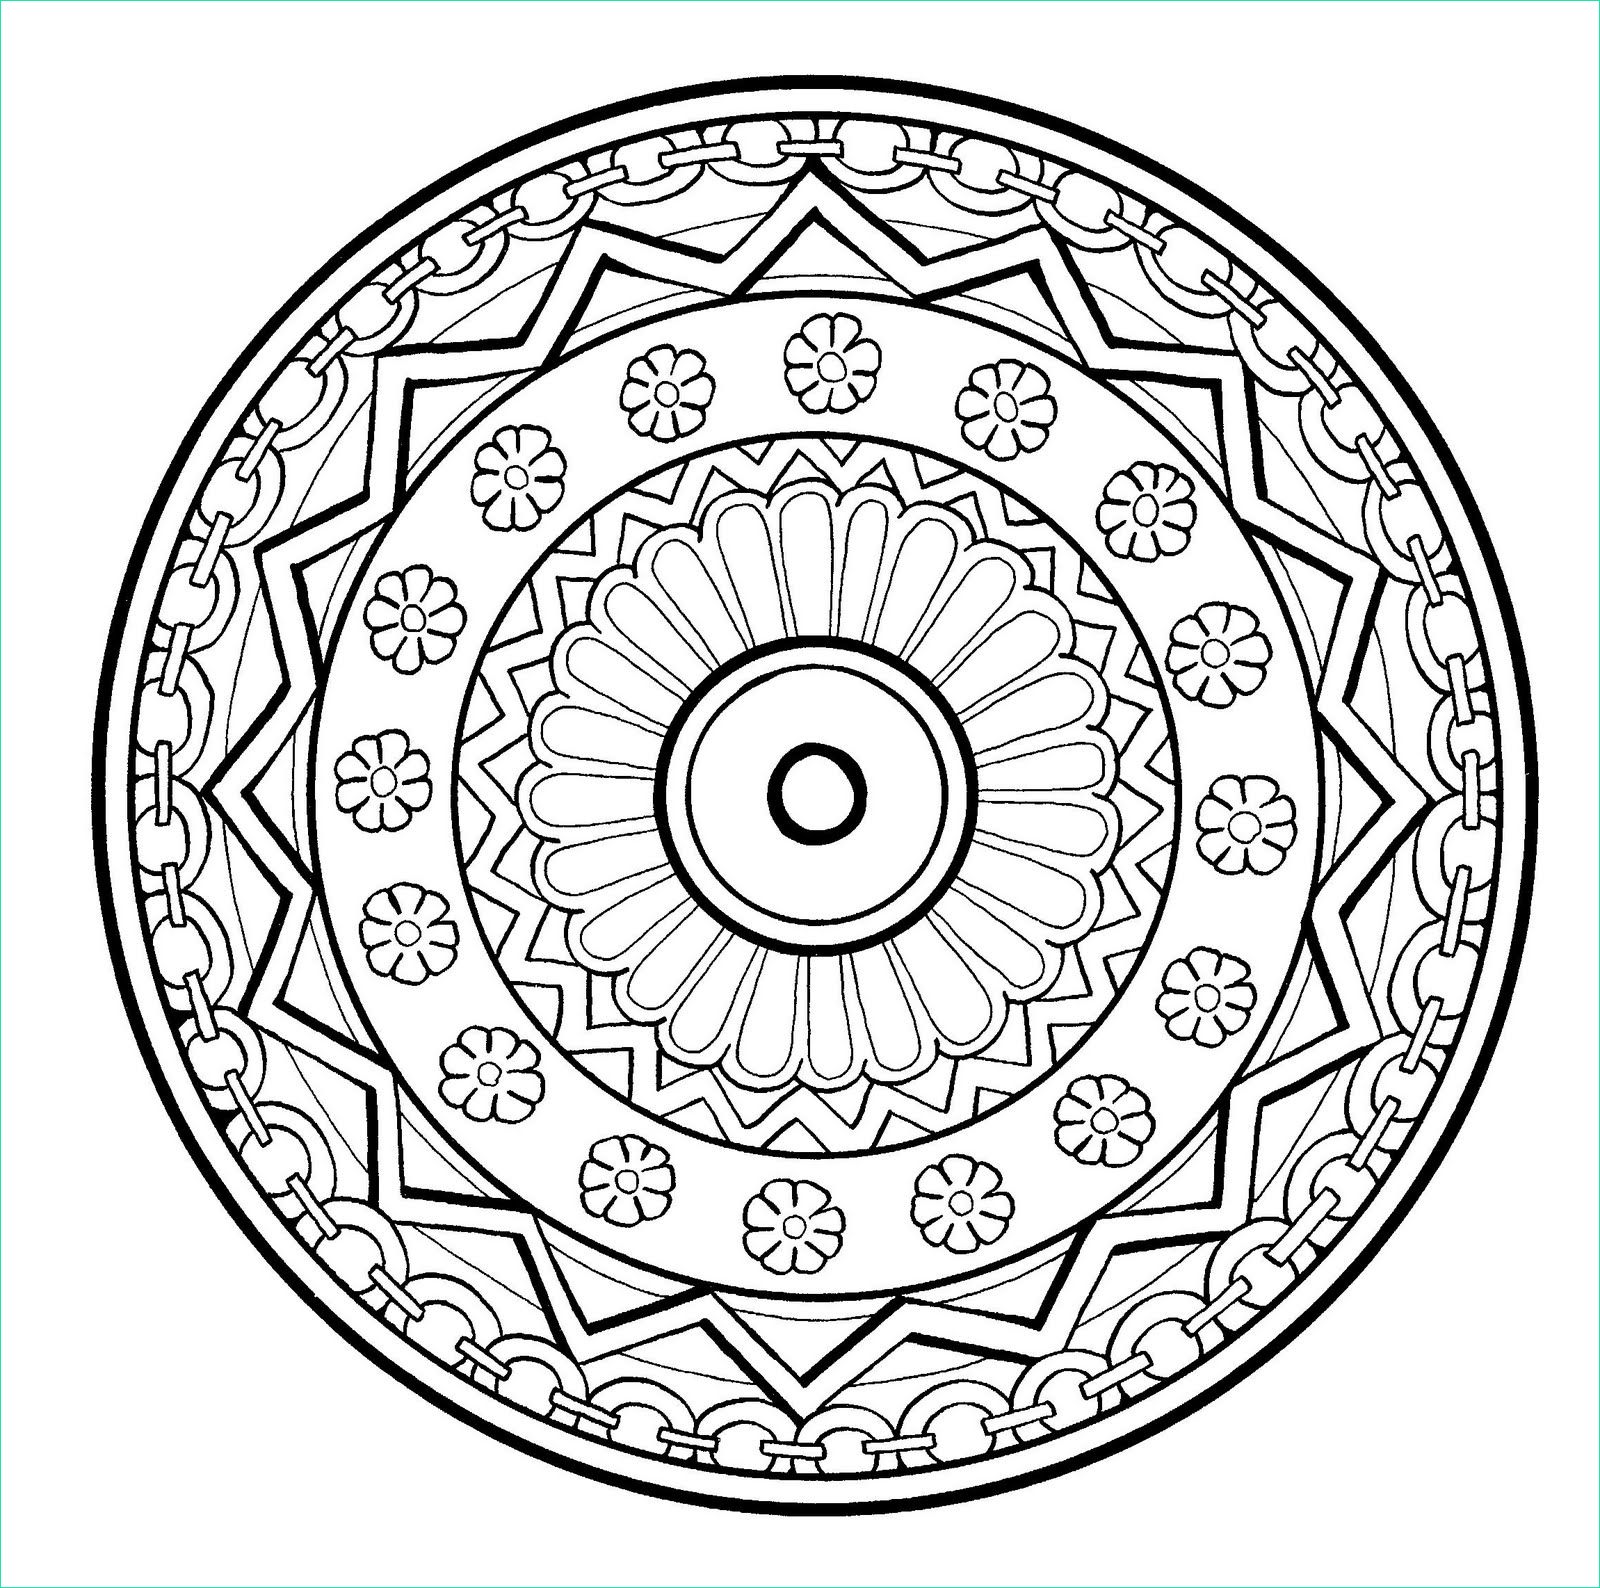 image=flowers ve ation mandala to color flowers ve ation to print (7) 1